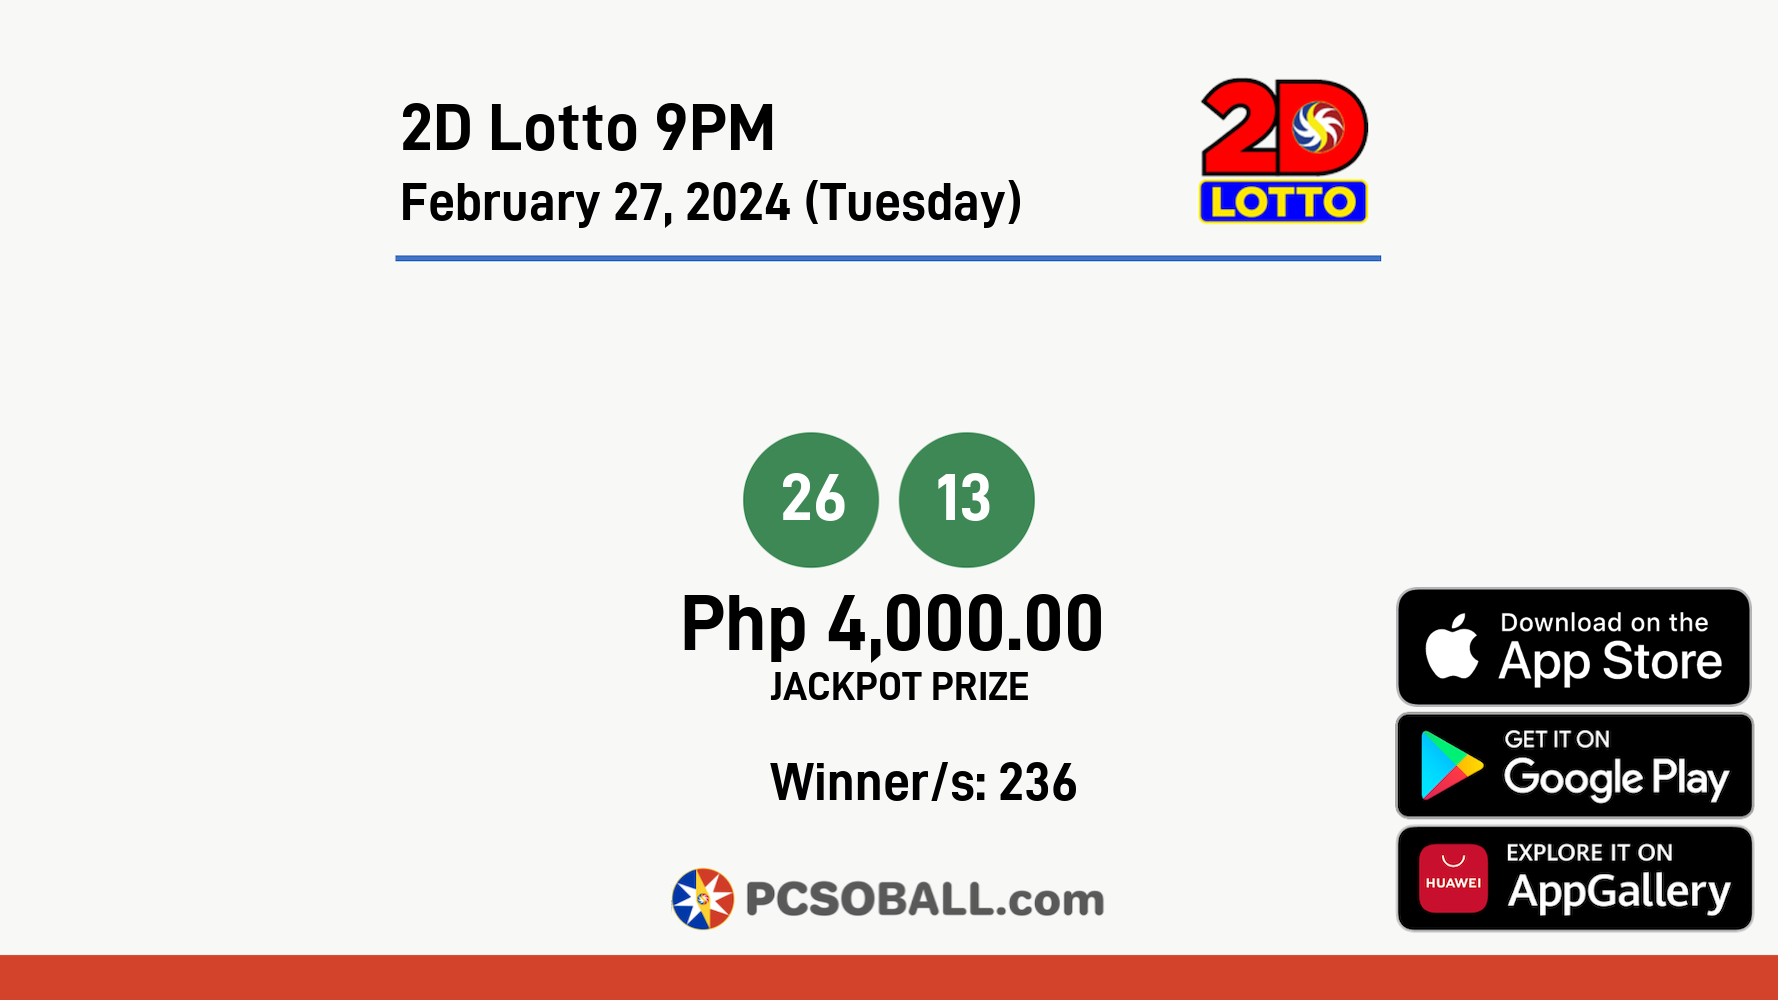 2D Lotto 9PM February 27, 2024 (Tuesday) Result